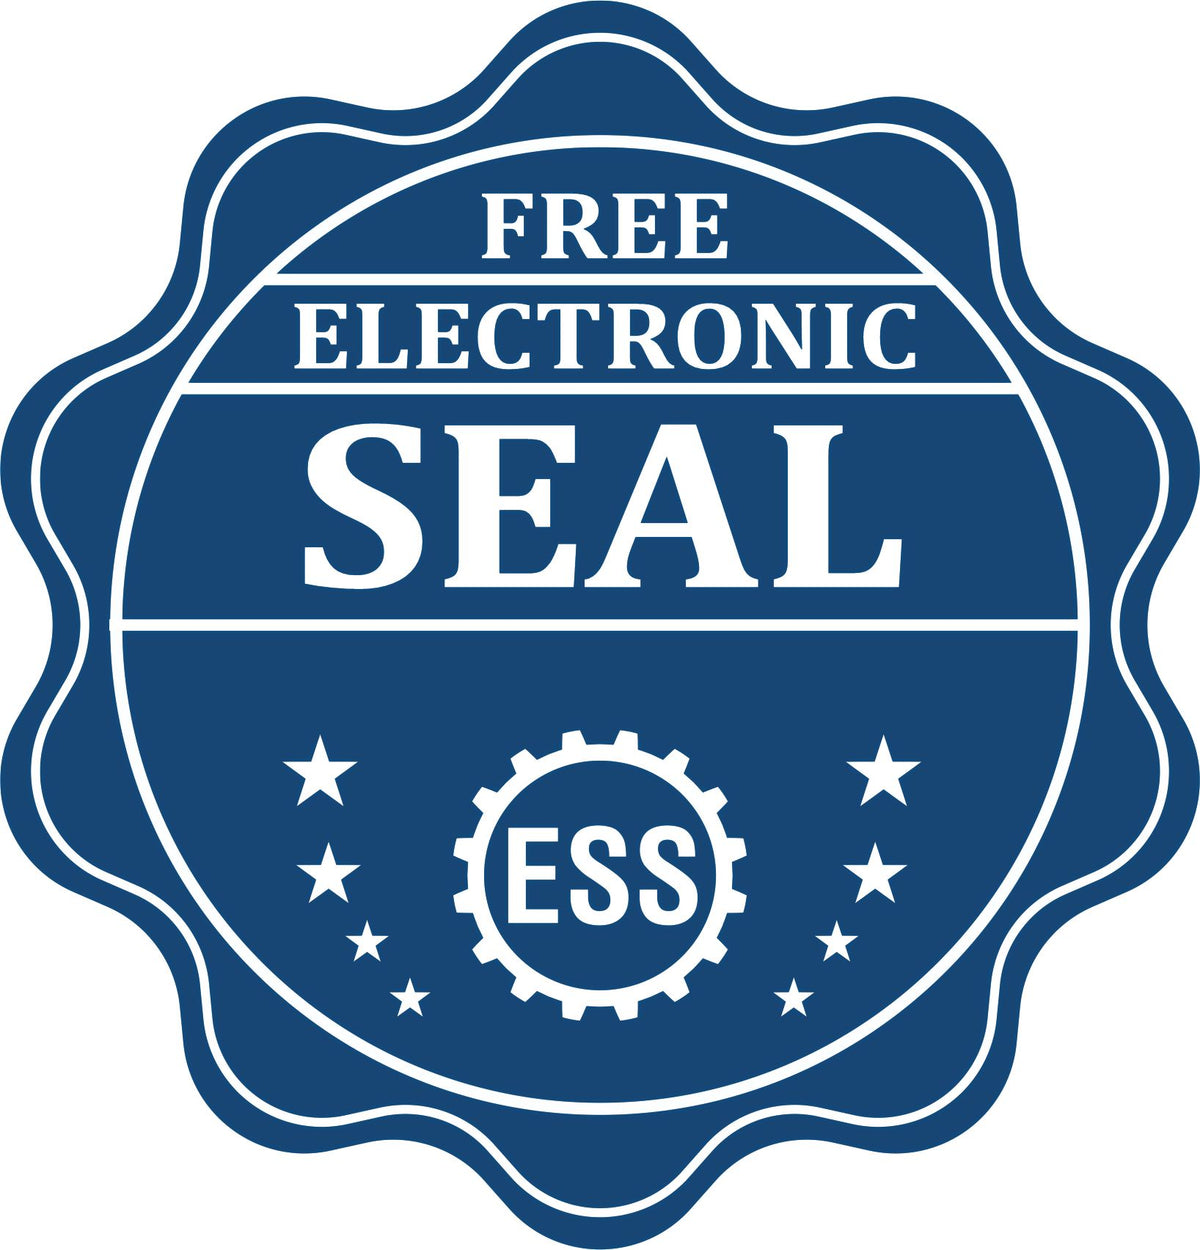 A badge showing a free electronic seal for the Heavy Duty Cast Iron Missouri Engineer Seal Embosser with stars and the ESS gear on the emblem.